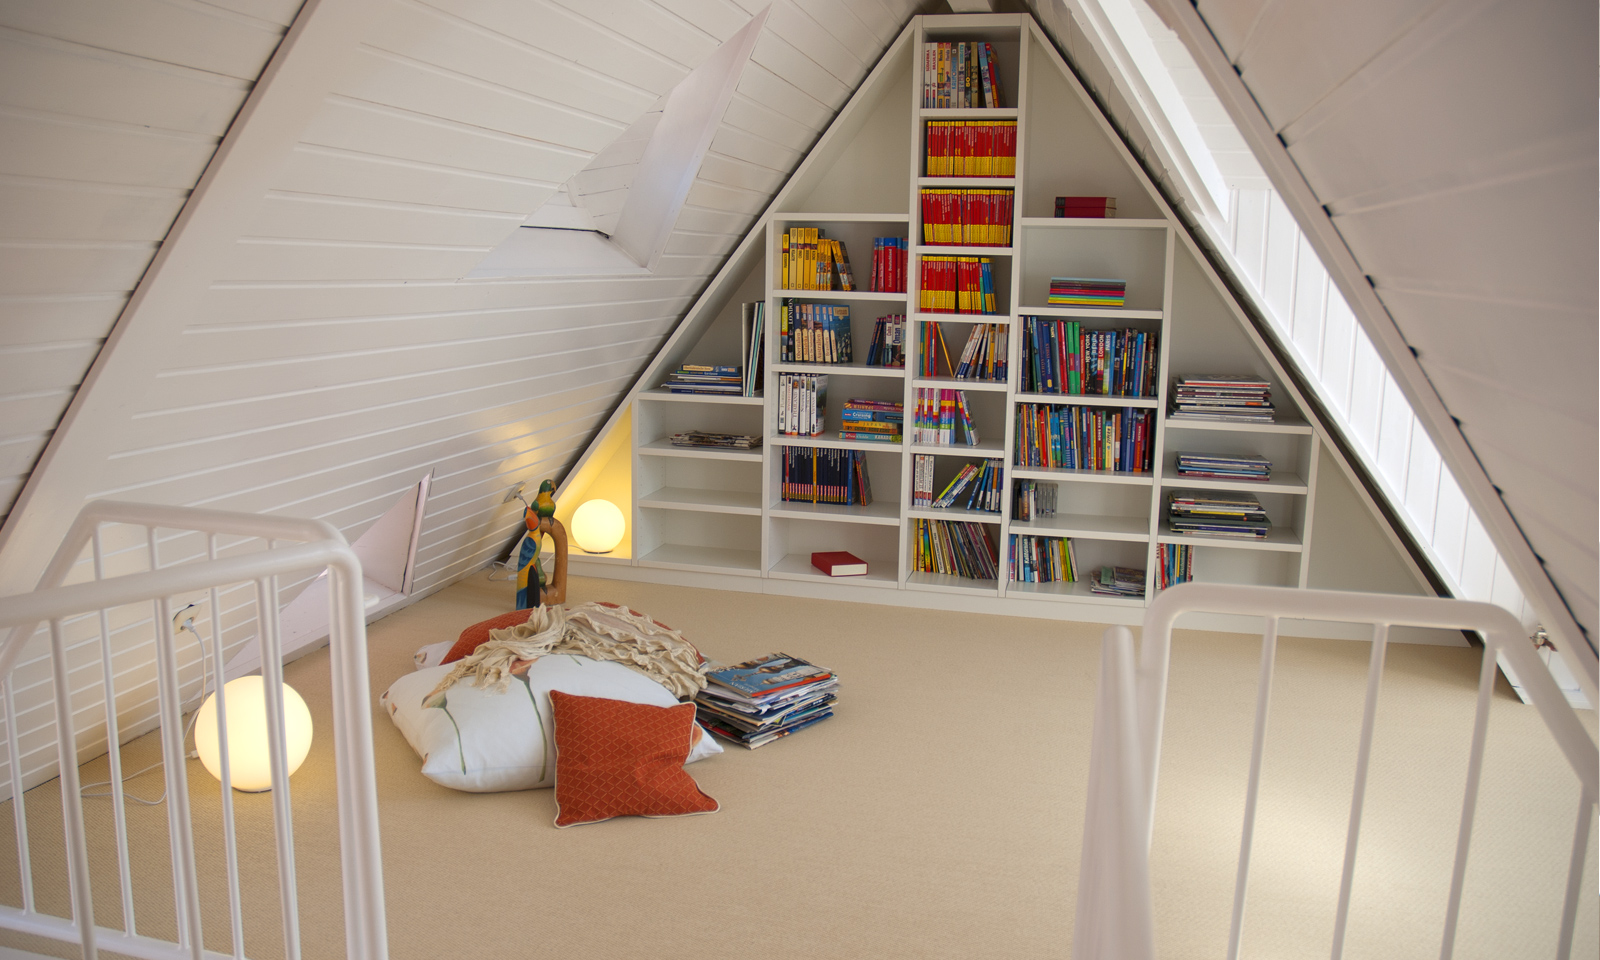 Loft conversion as a wonderful reading room with storage space for many books